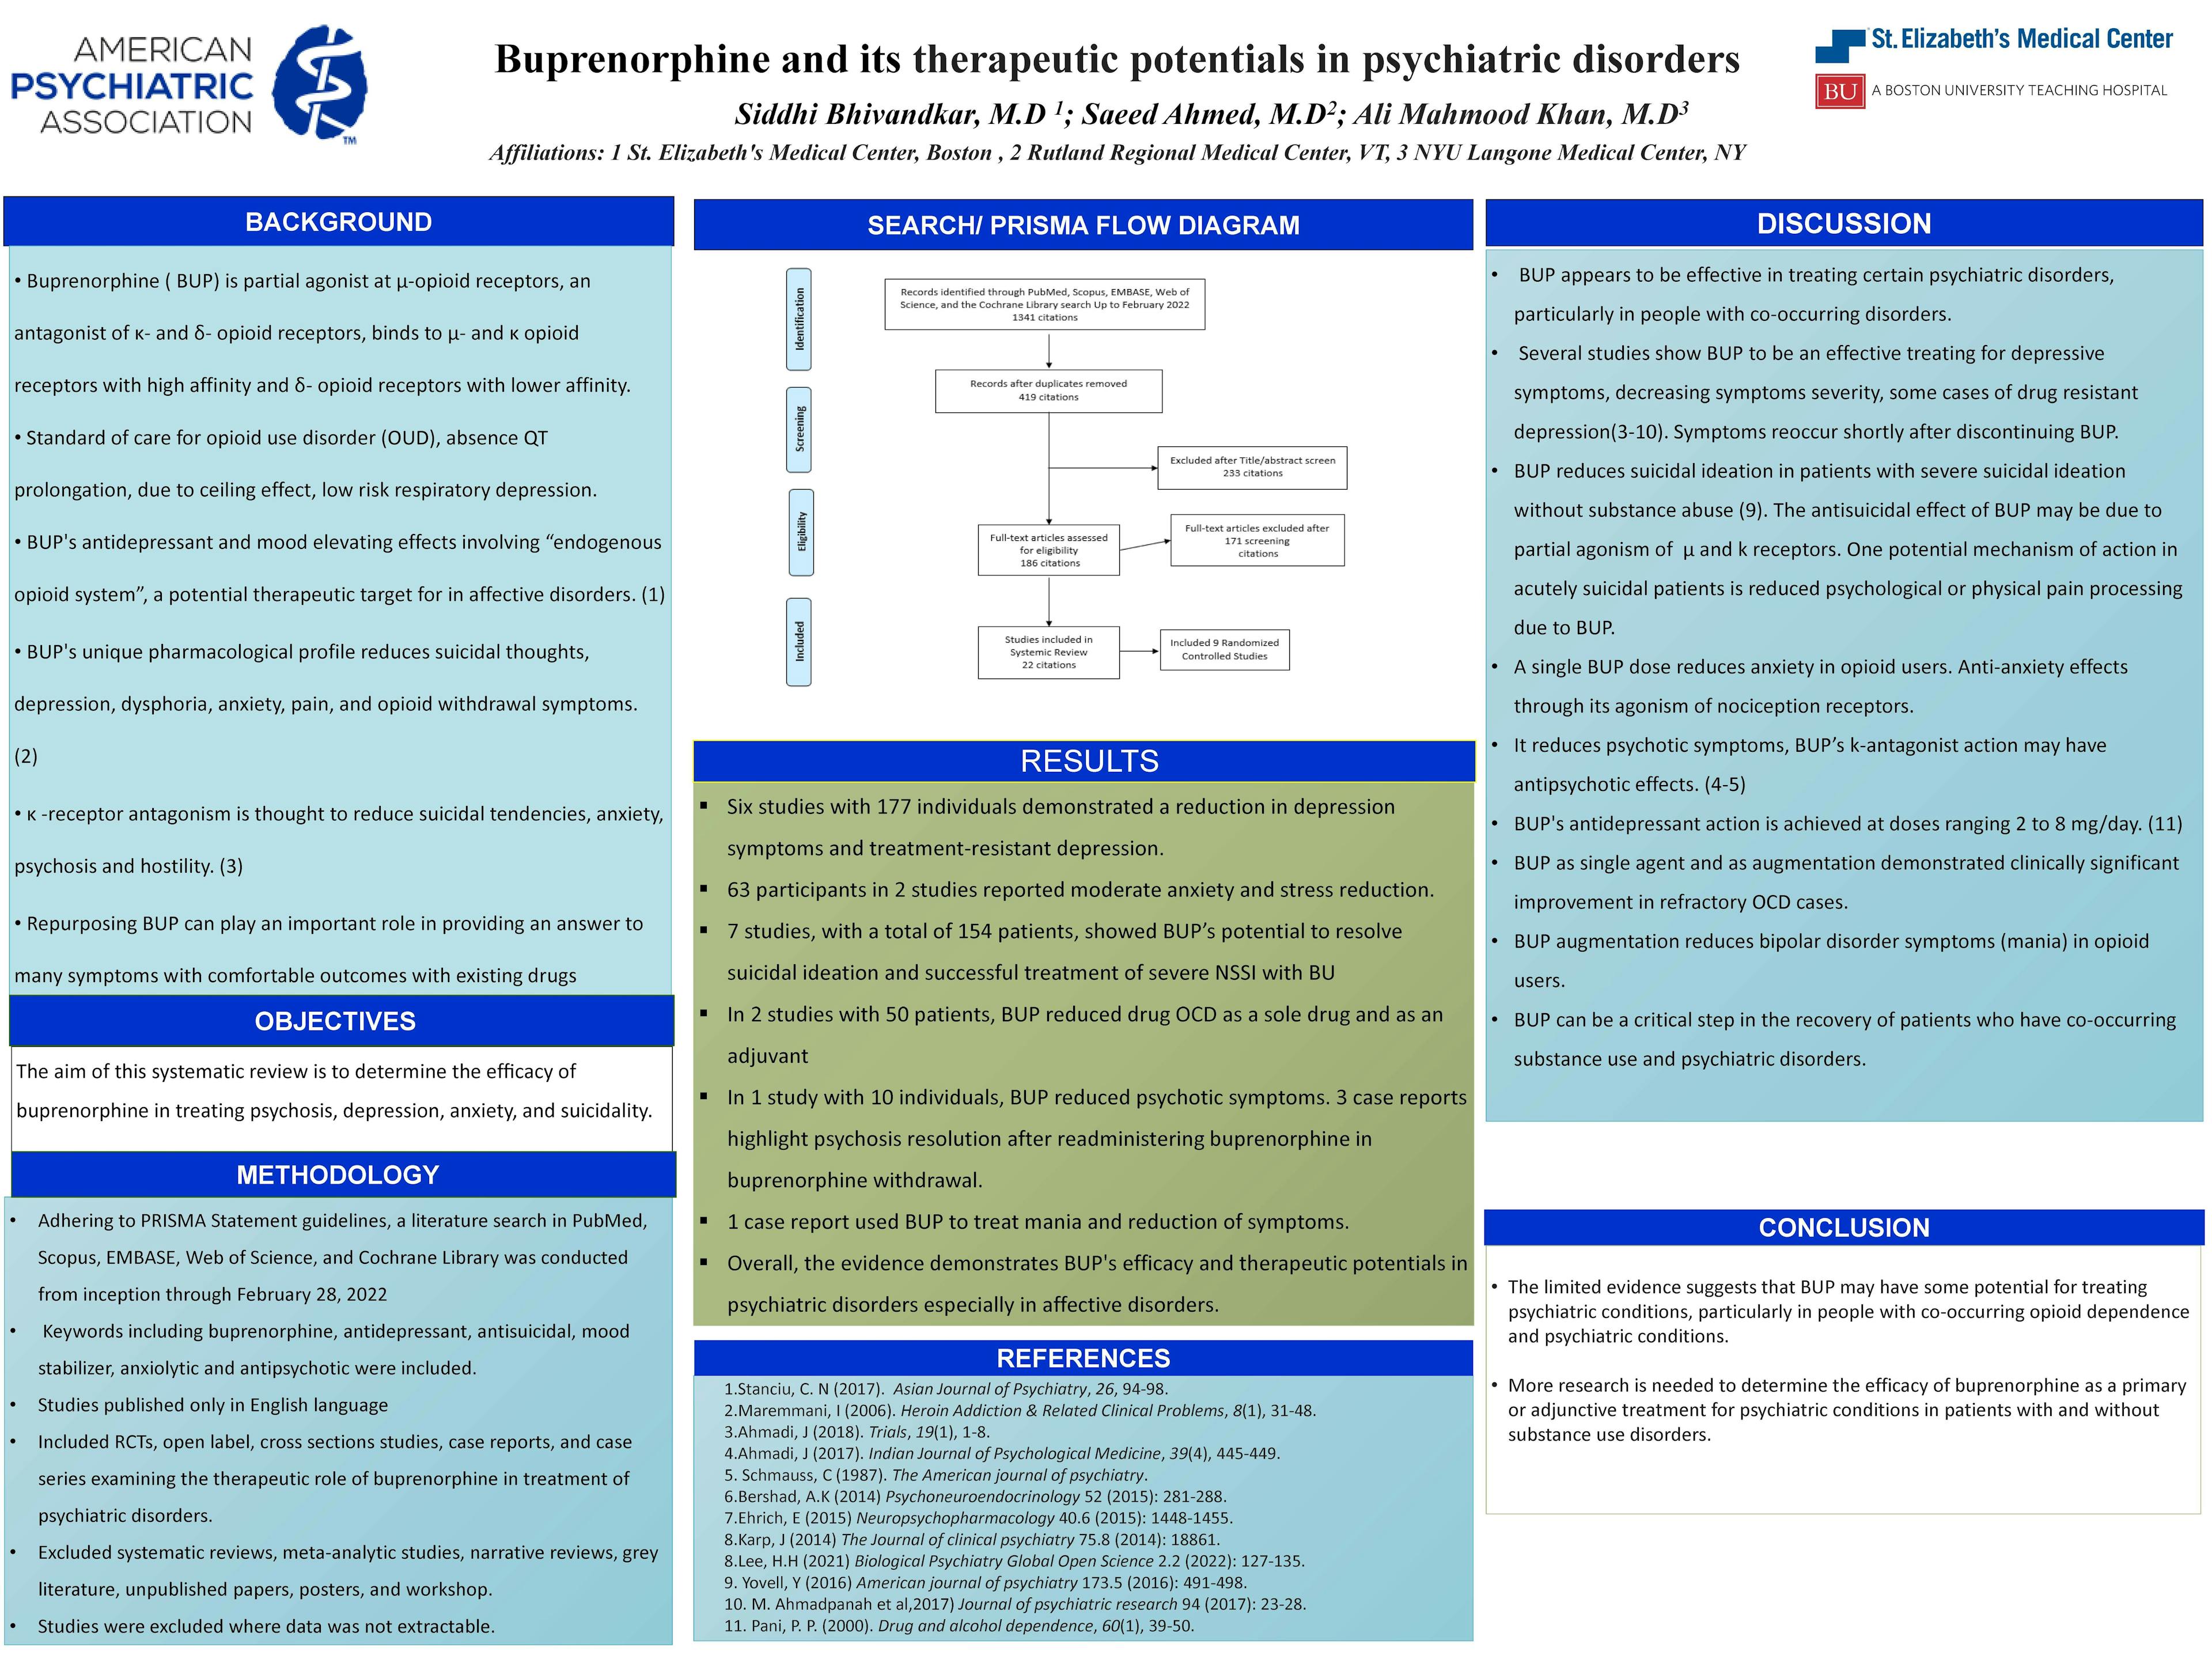 Figure. Buprenorphine and Its Therapeutic Potentials in Psychiatric Disorders, Presented at the American Psychiatric Association 2022 Annual Meeting